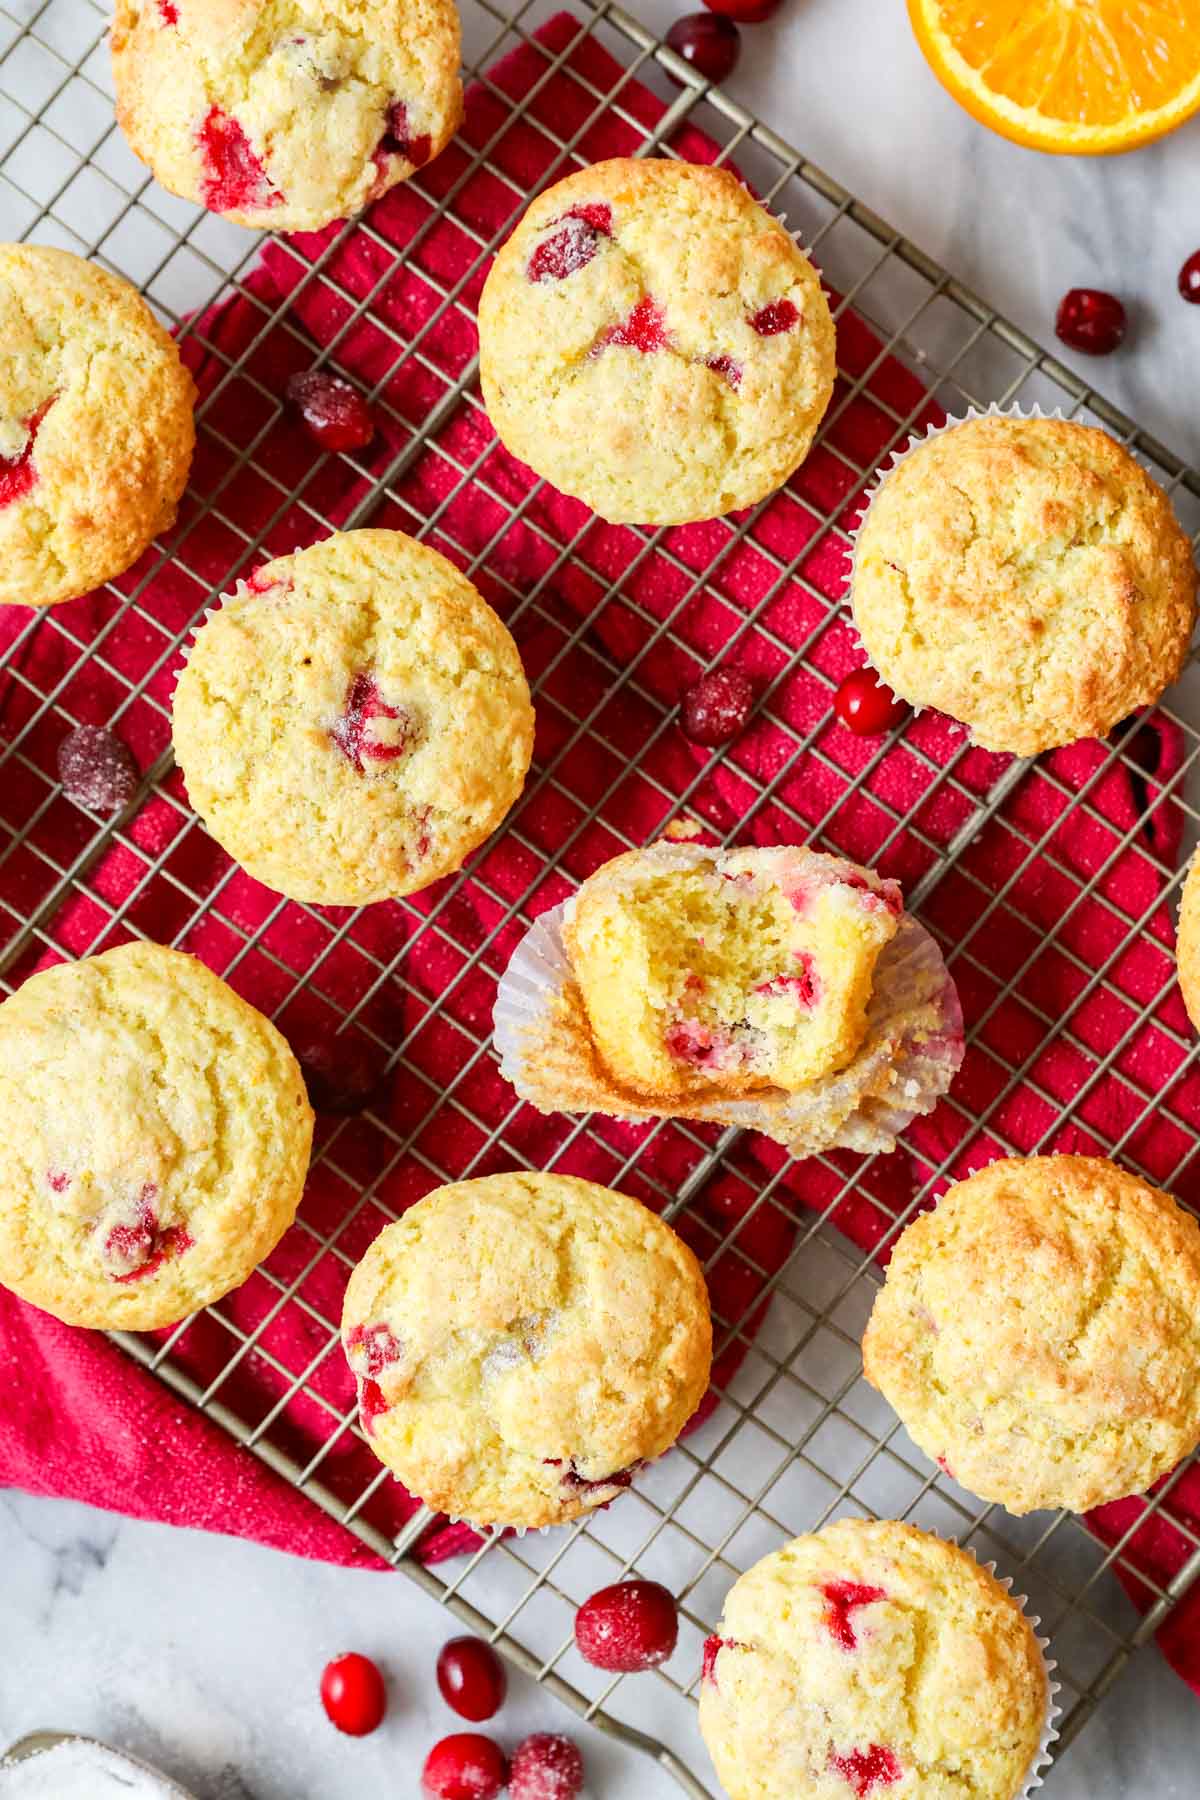 Overhead view of muffins made with cranberries and oranges on a cooling rack.